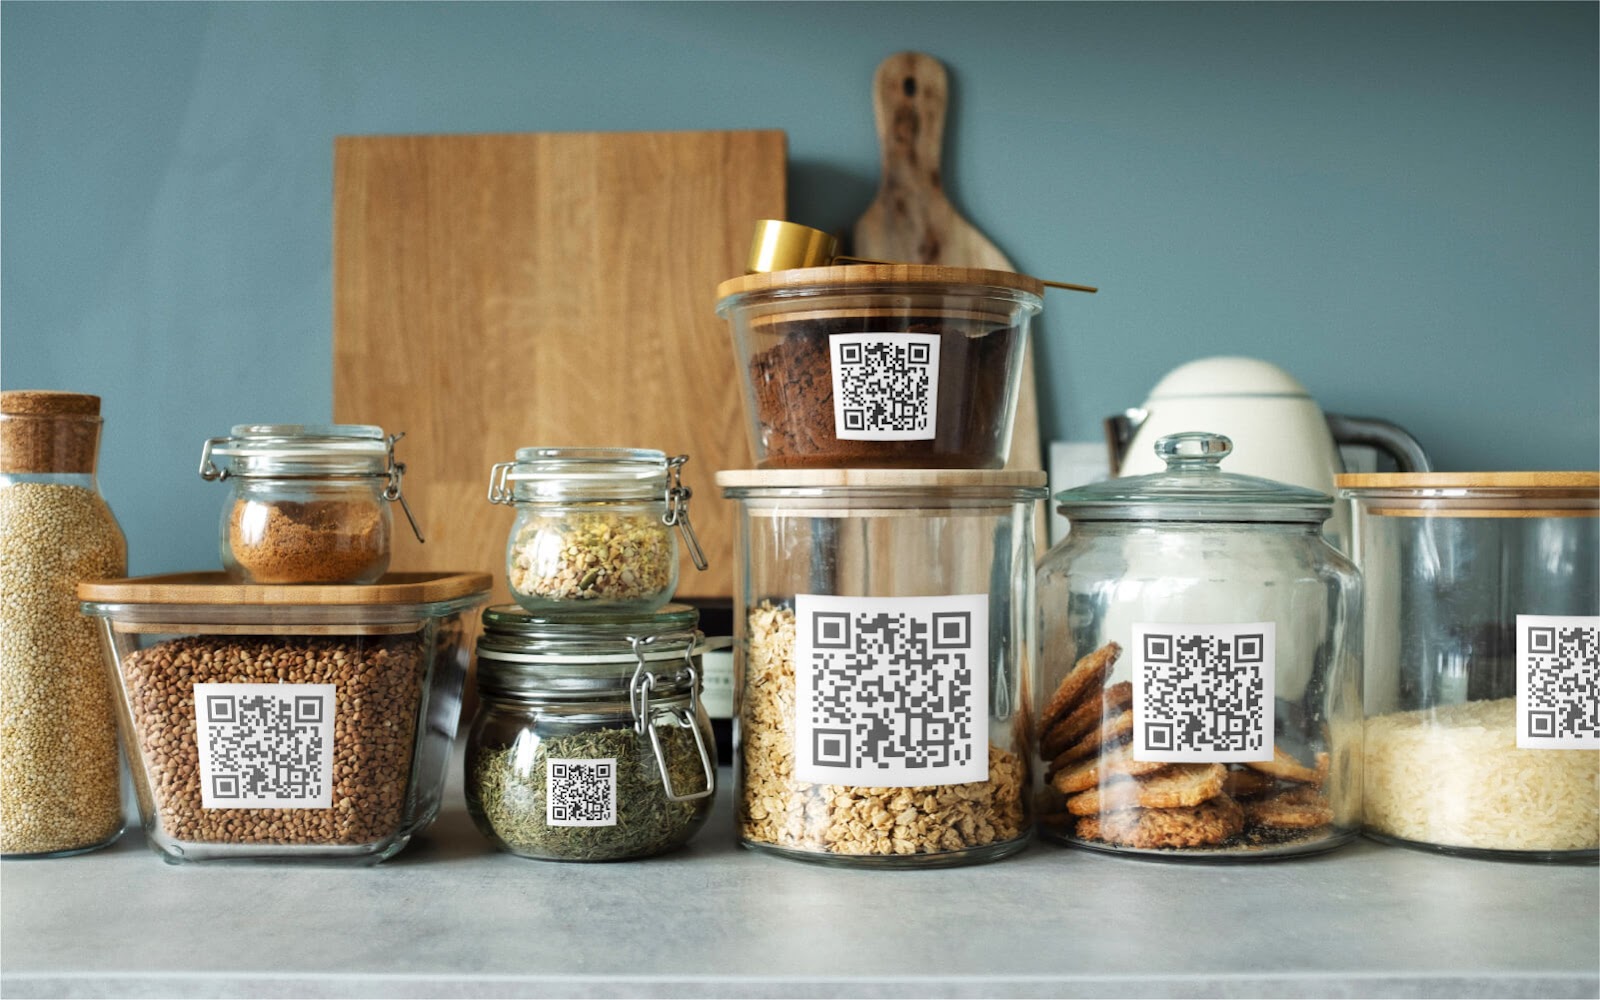 QR Codes as labels on jars for reordering